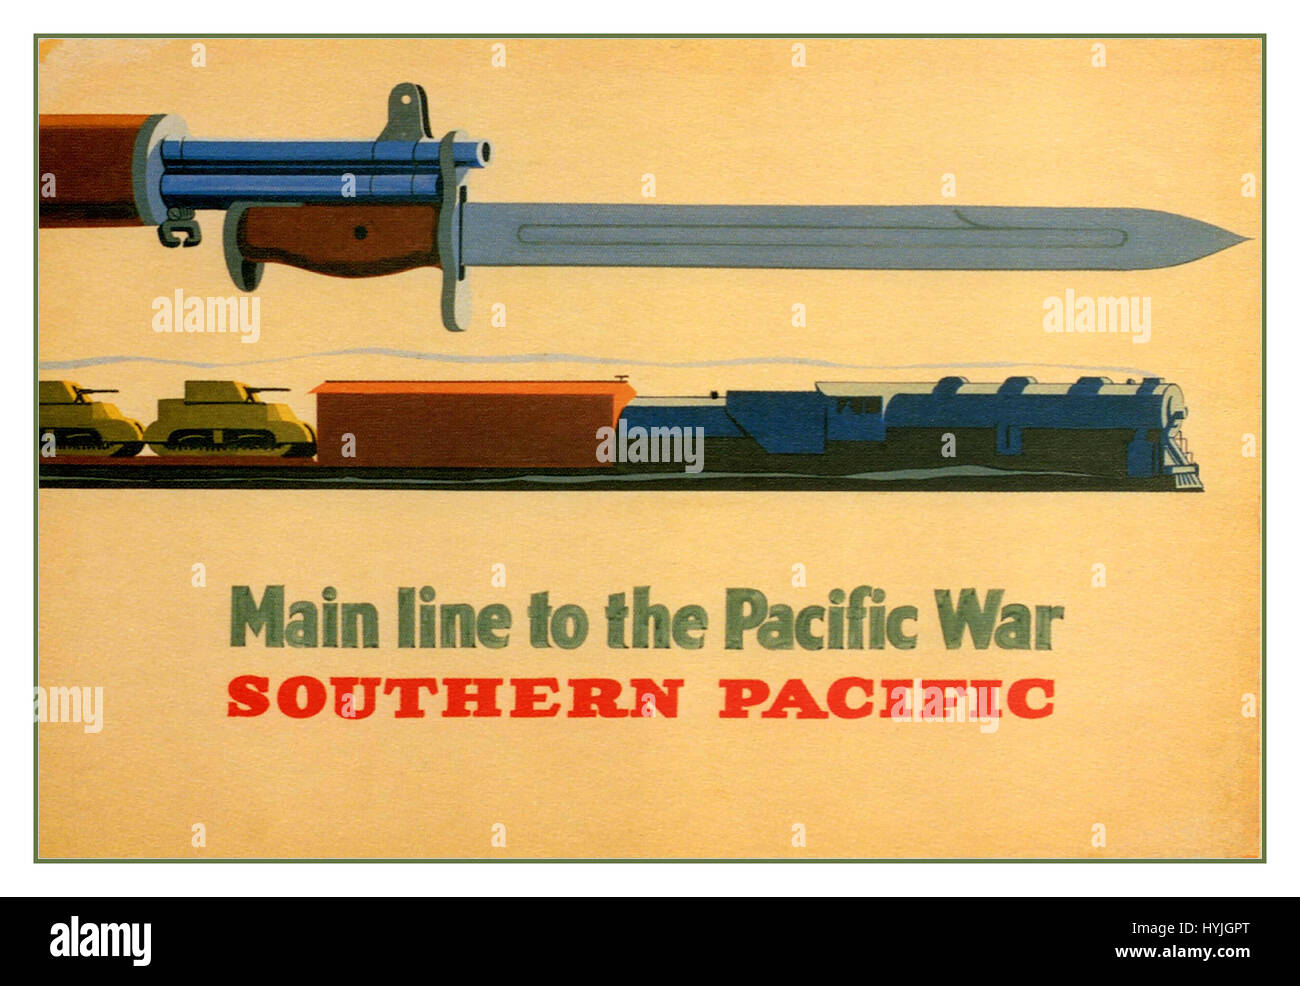 A History of War and Bravery portrayed  in this famous “Main line to the Pacific War by Southern Pacific” travel poster created by George and Lerner Lyman Power in 1943. Stock Photo